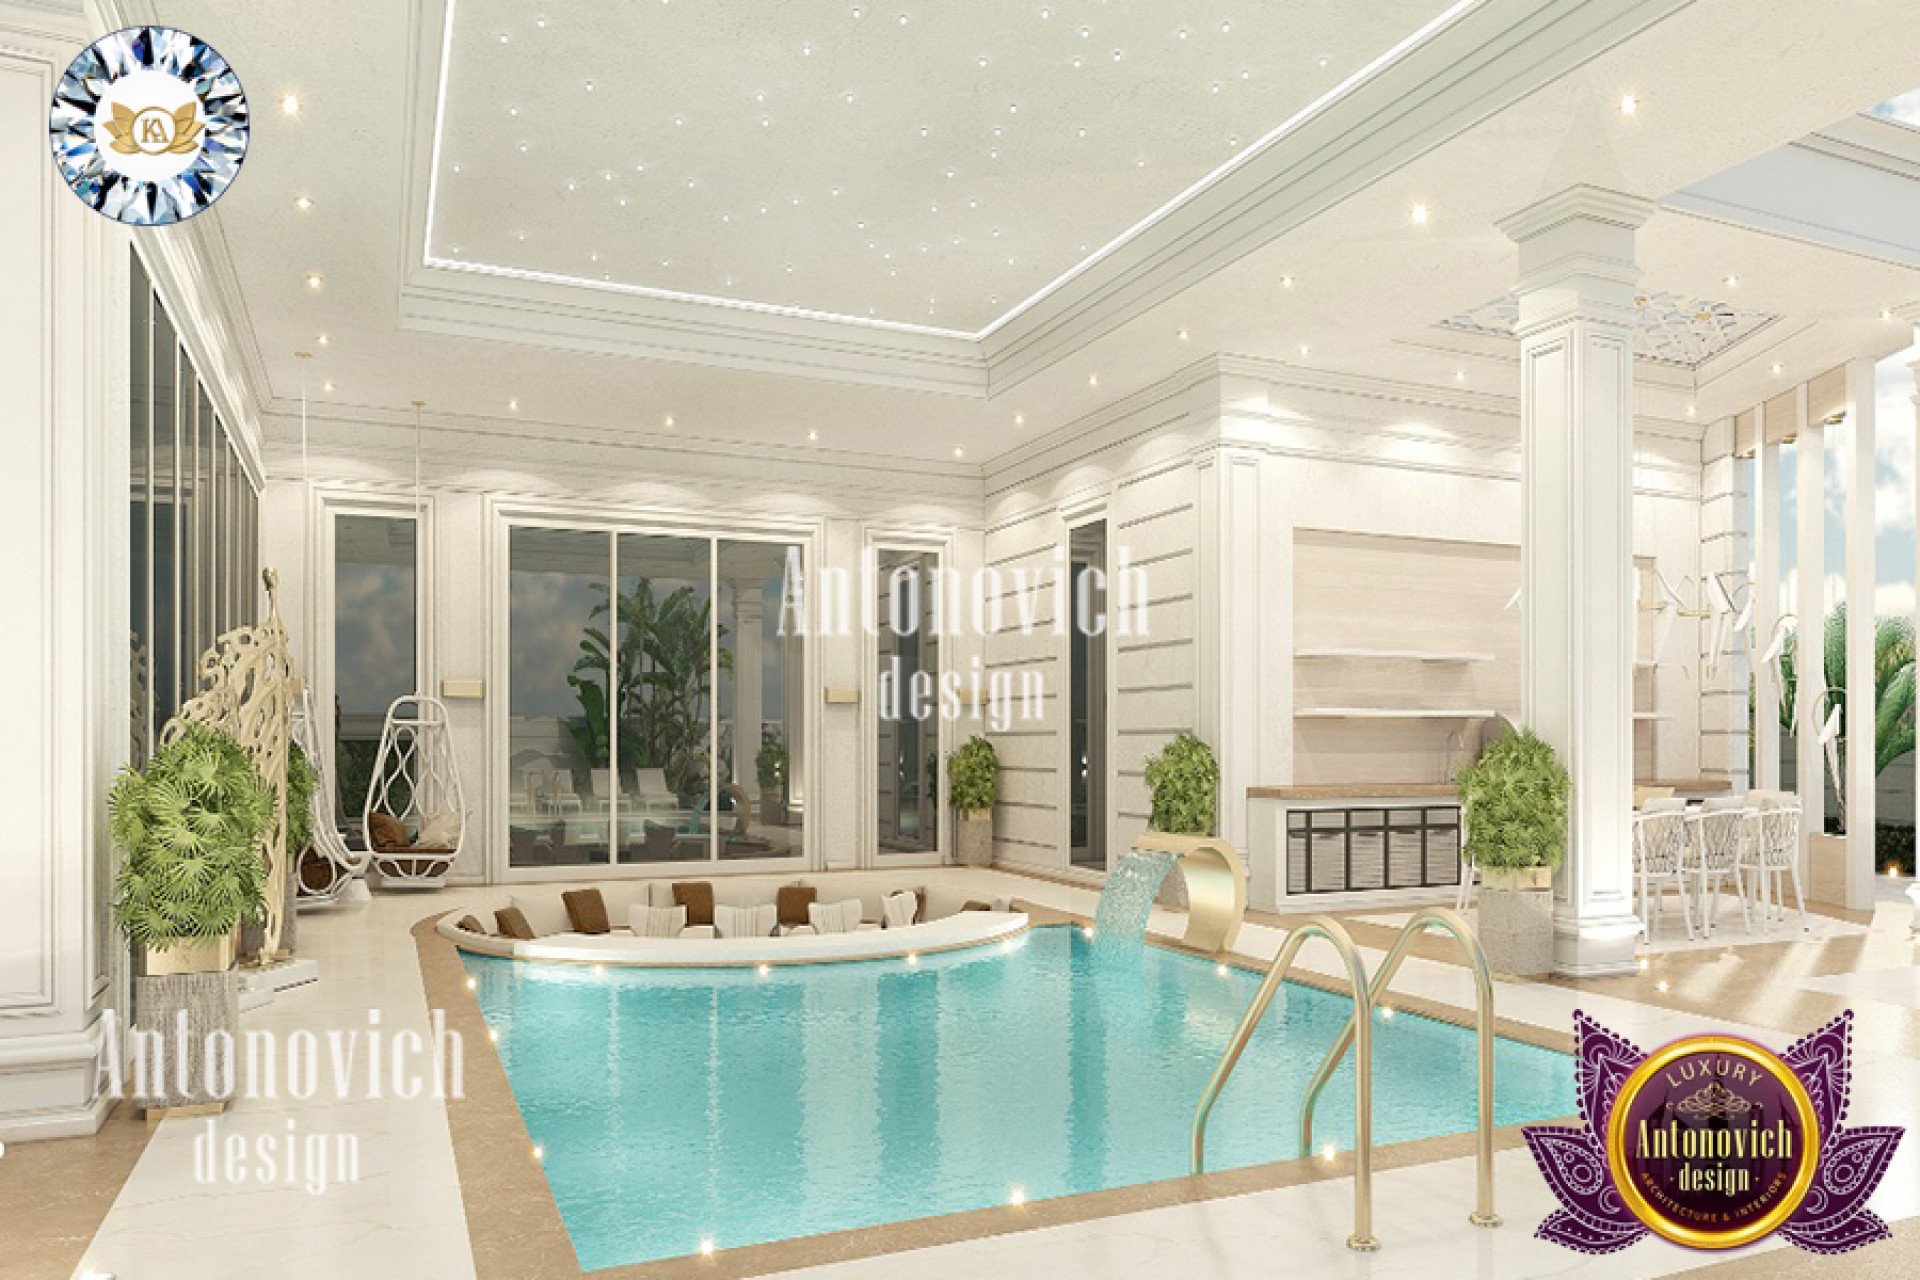 IDEAL SWIMMING POOL DESIGN FOR LUXURY HOME BY LUXURY ANTONOVICH DESIGN 